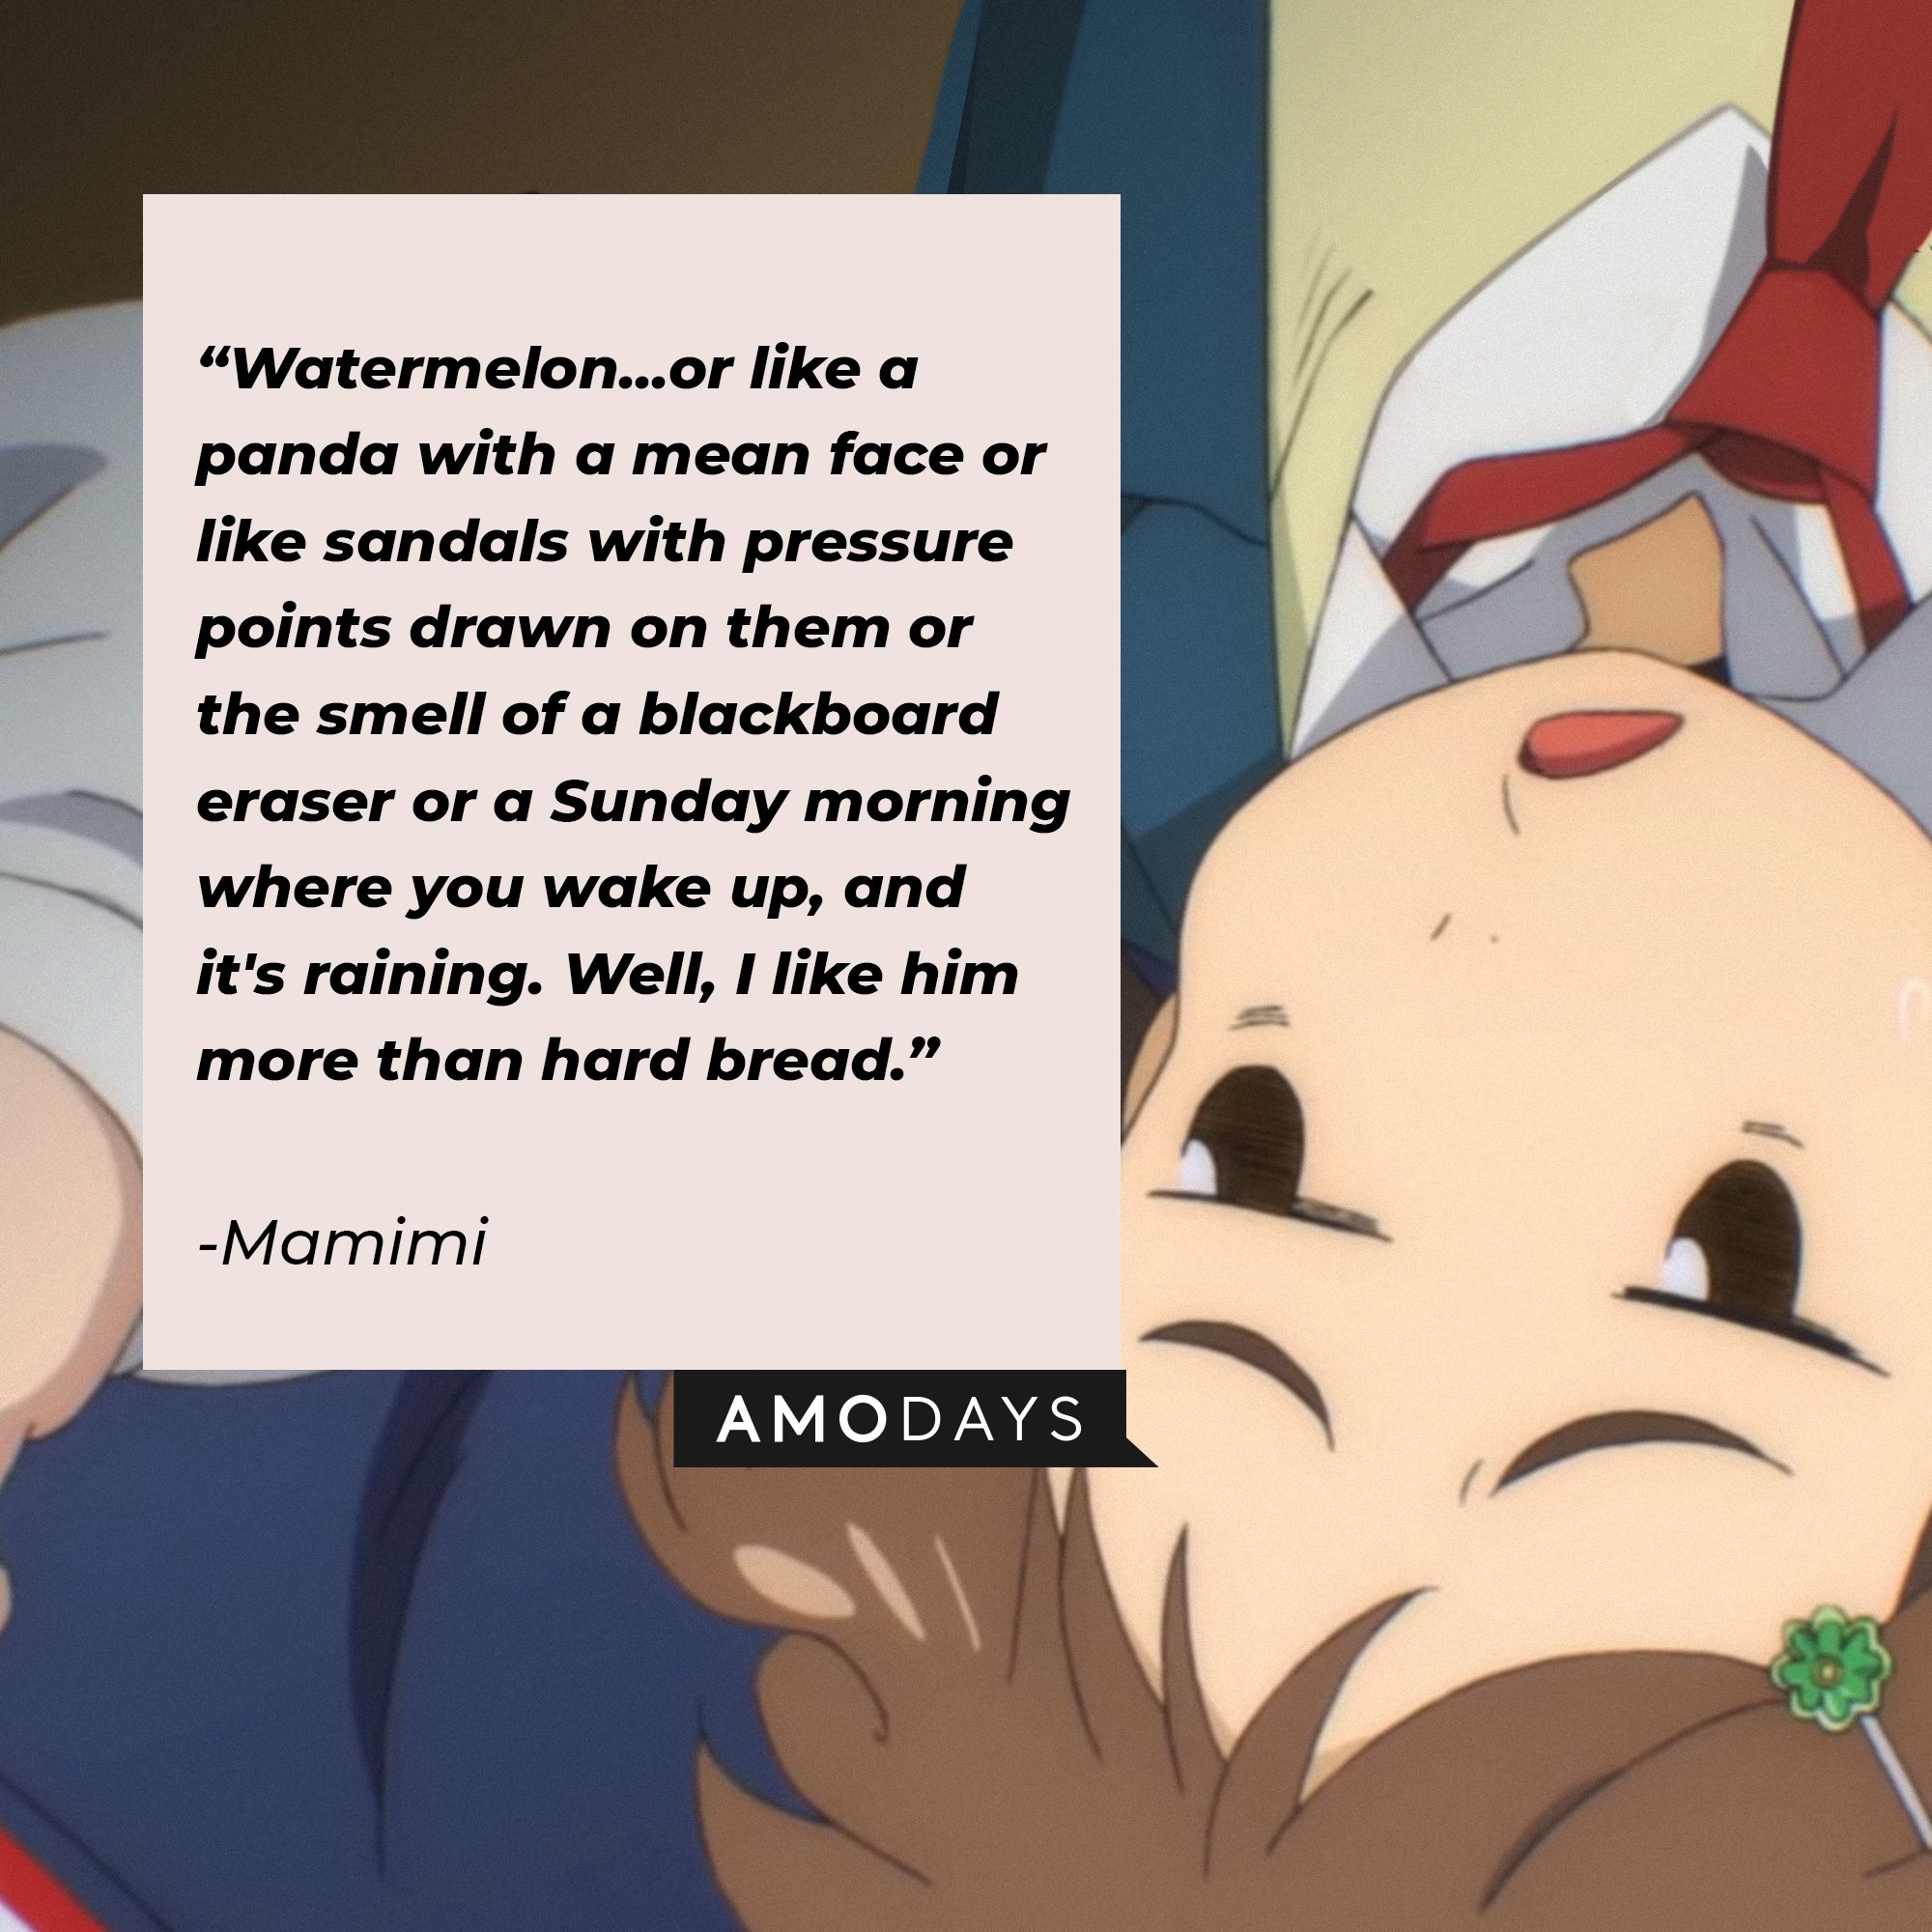 Mamimi’s quote : "Watermelon...or like a panda with a mean face or sandals with pressure points drawn on them or the smell of a blackboard eraser or a Sunday morning where you wake up, and it's raining. Well, I like him more than hard bread." | Image: AmoDays